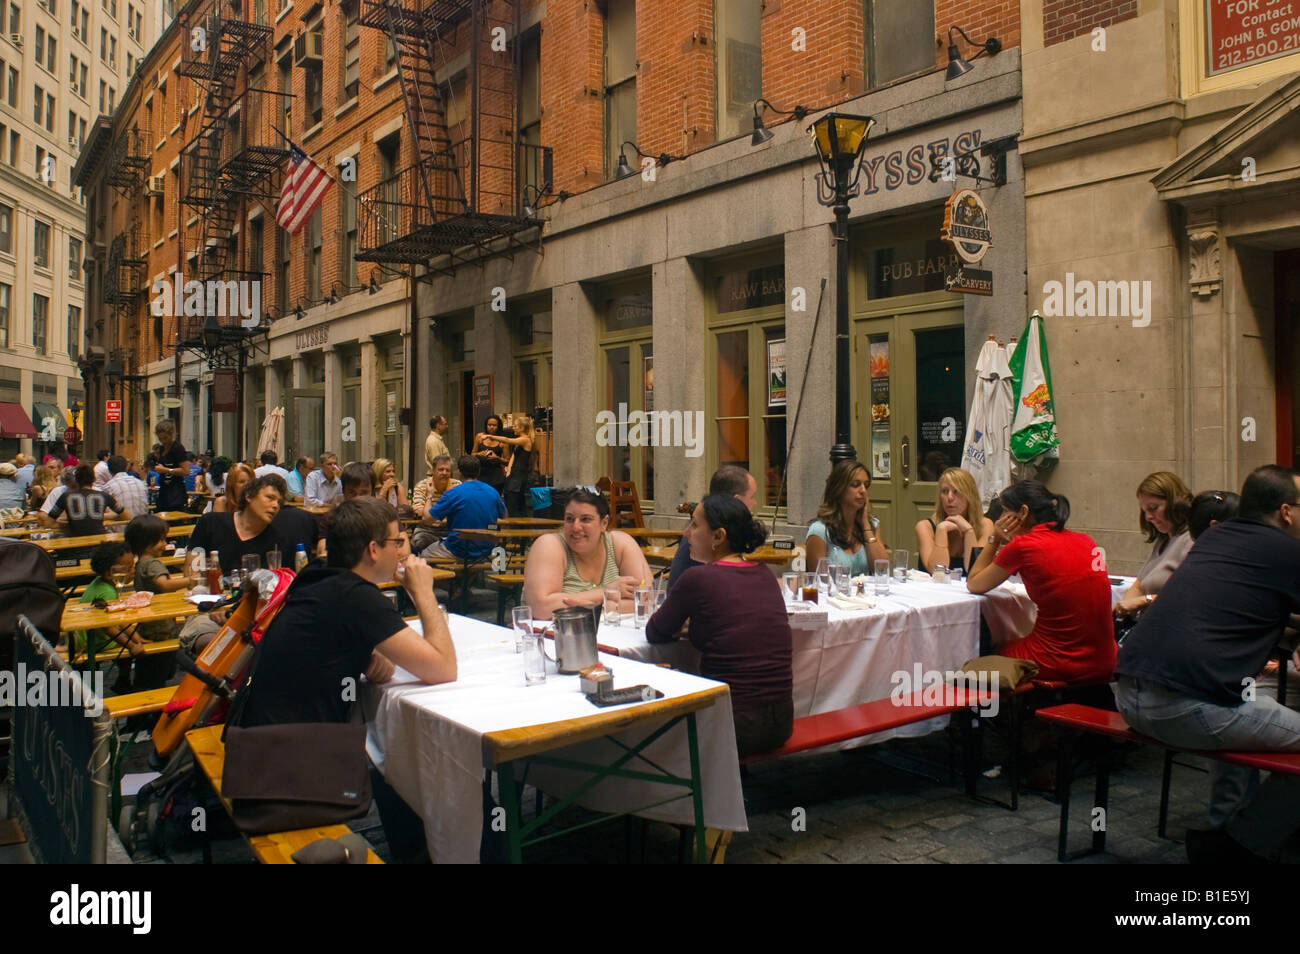 Restaurants on Stone Street in Lower Manhattan extend into the closed street Stock Photo